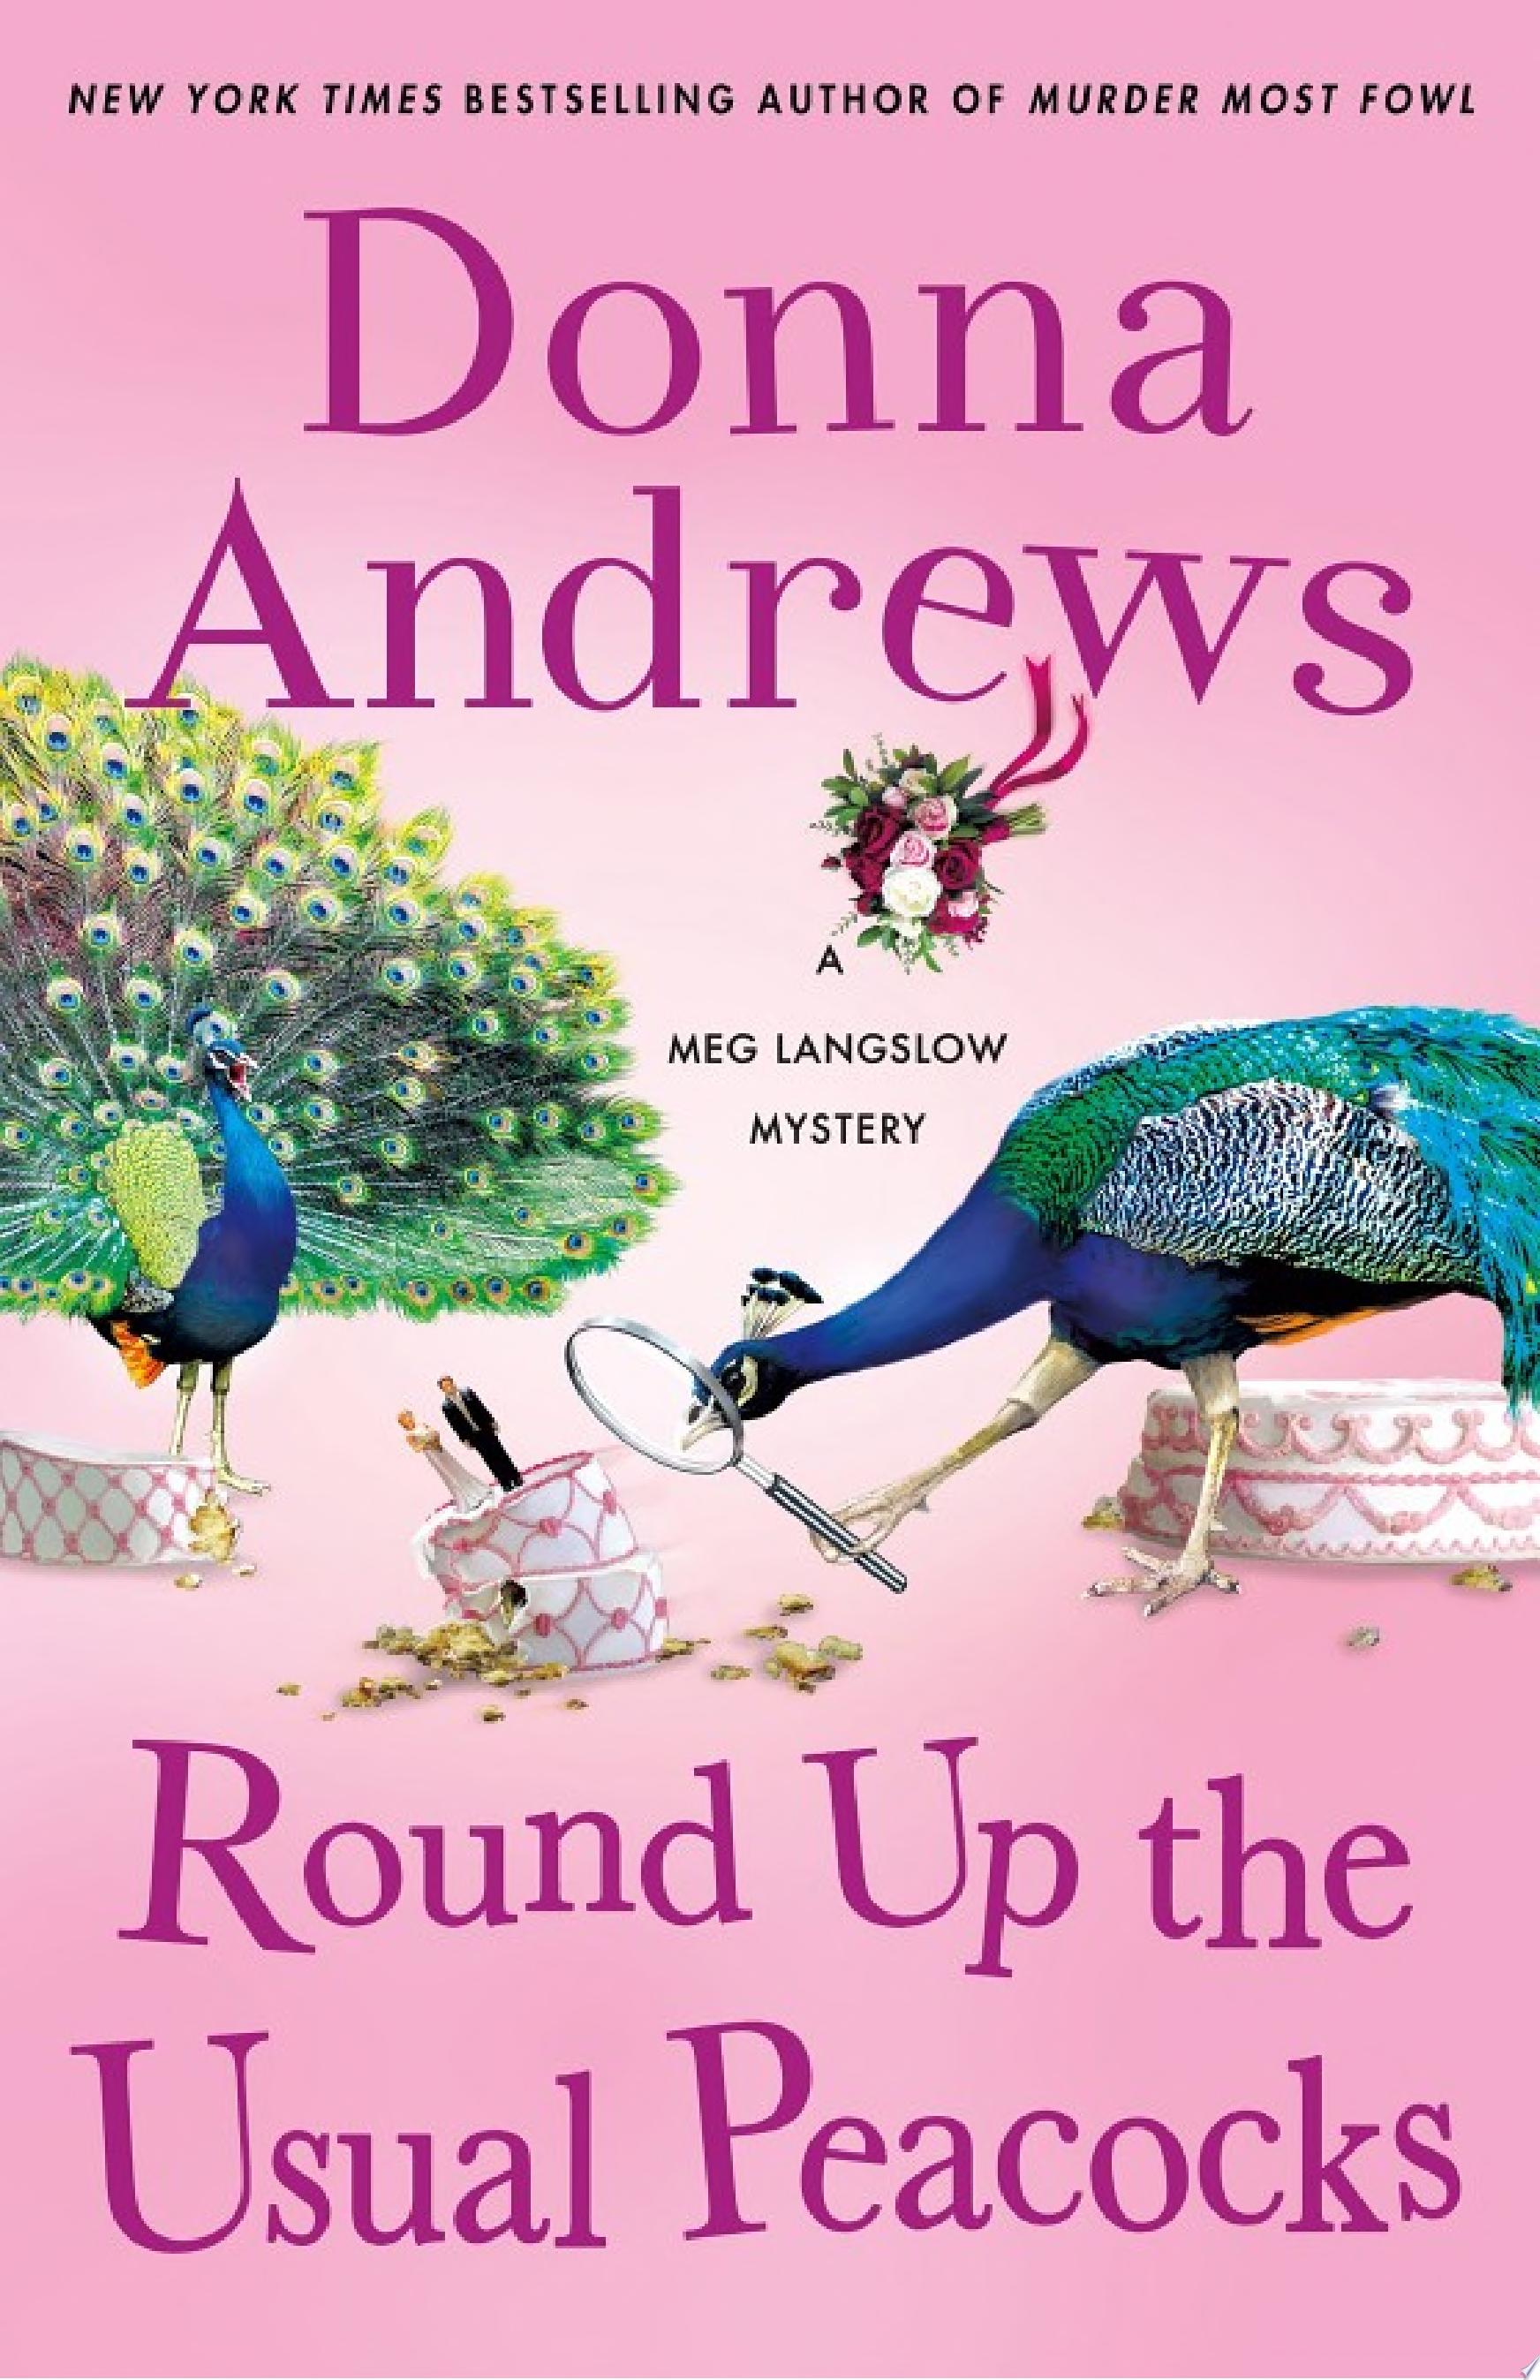 Image for "Round Up the Usual Peacocks"